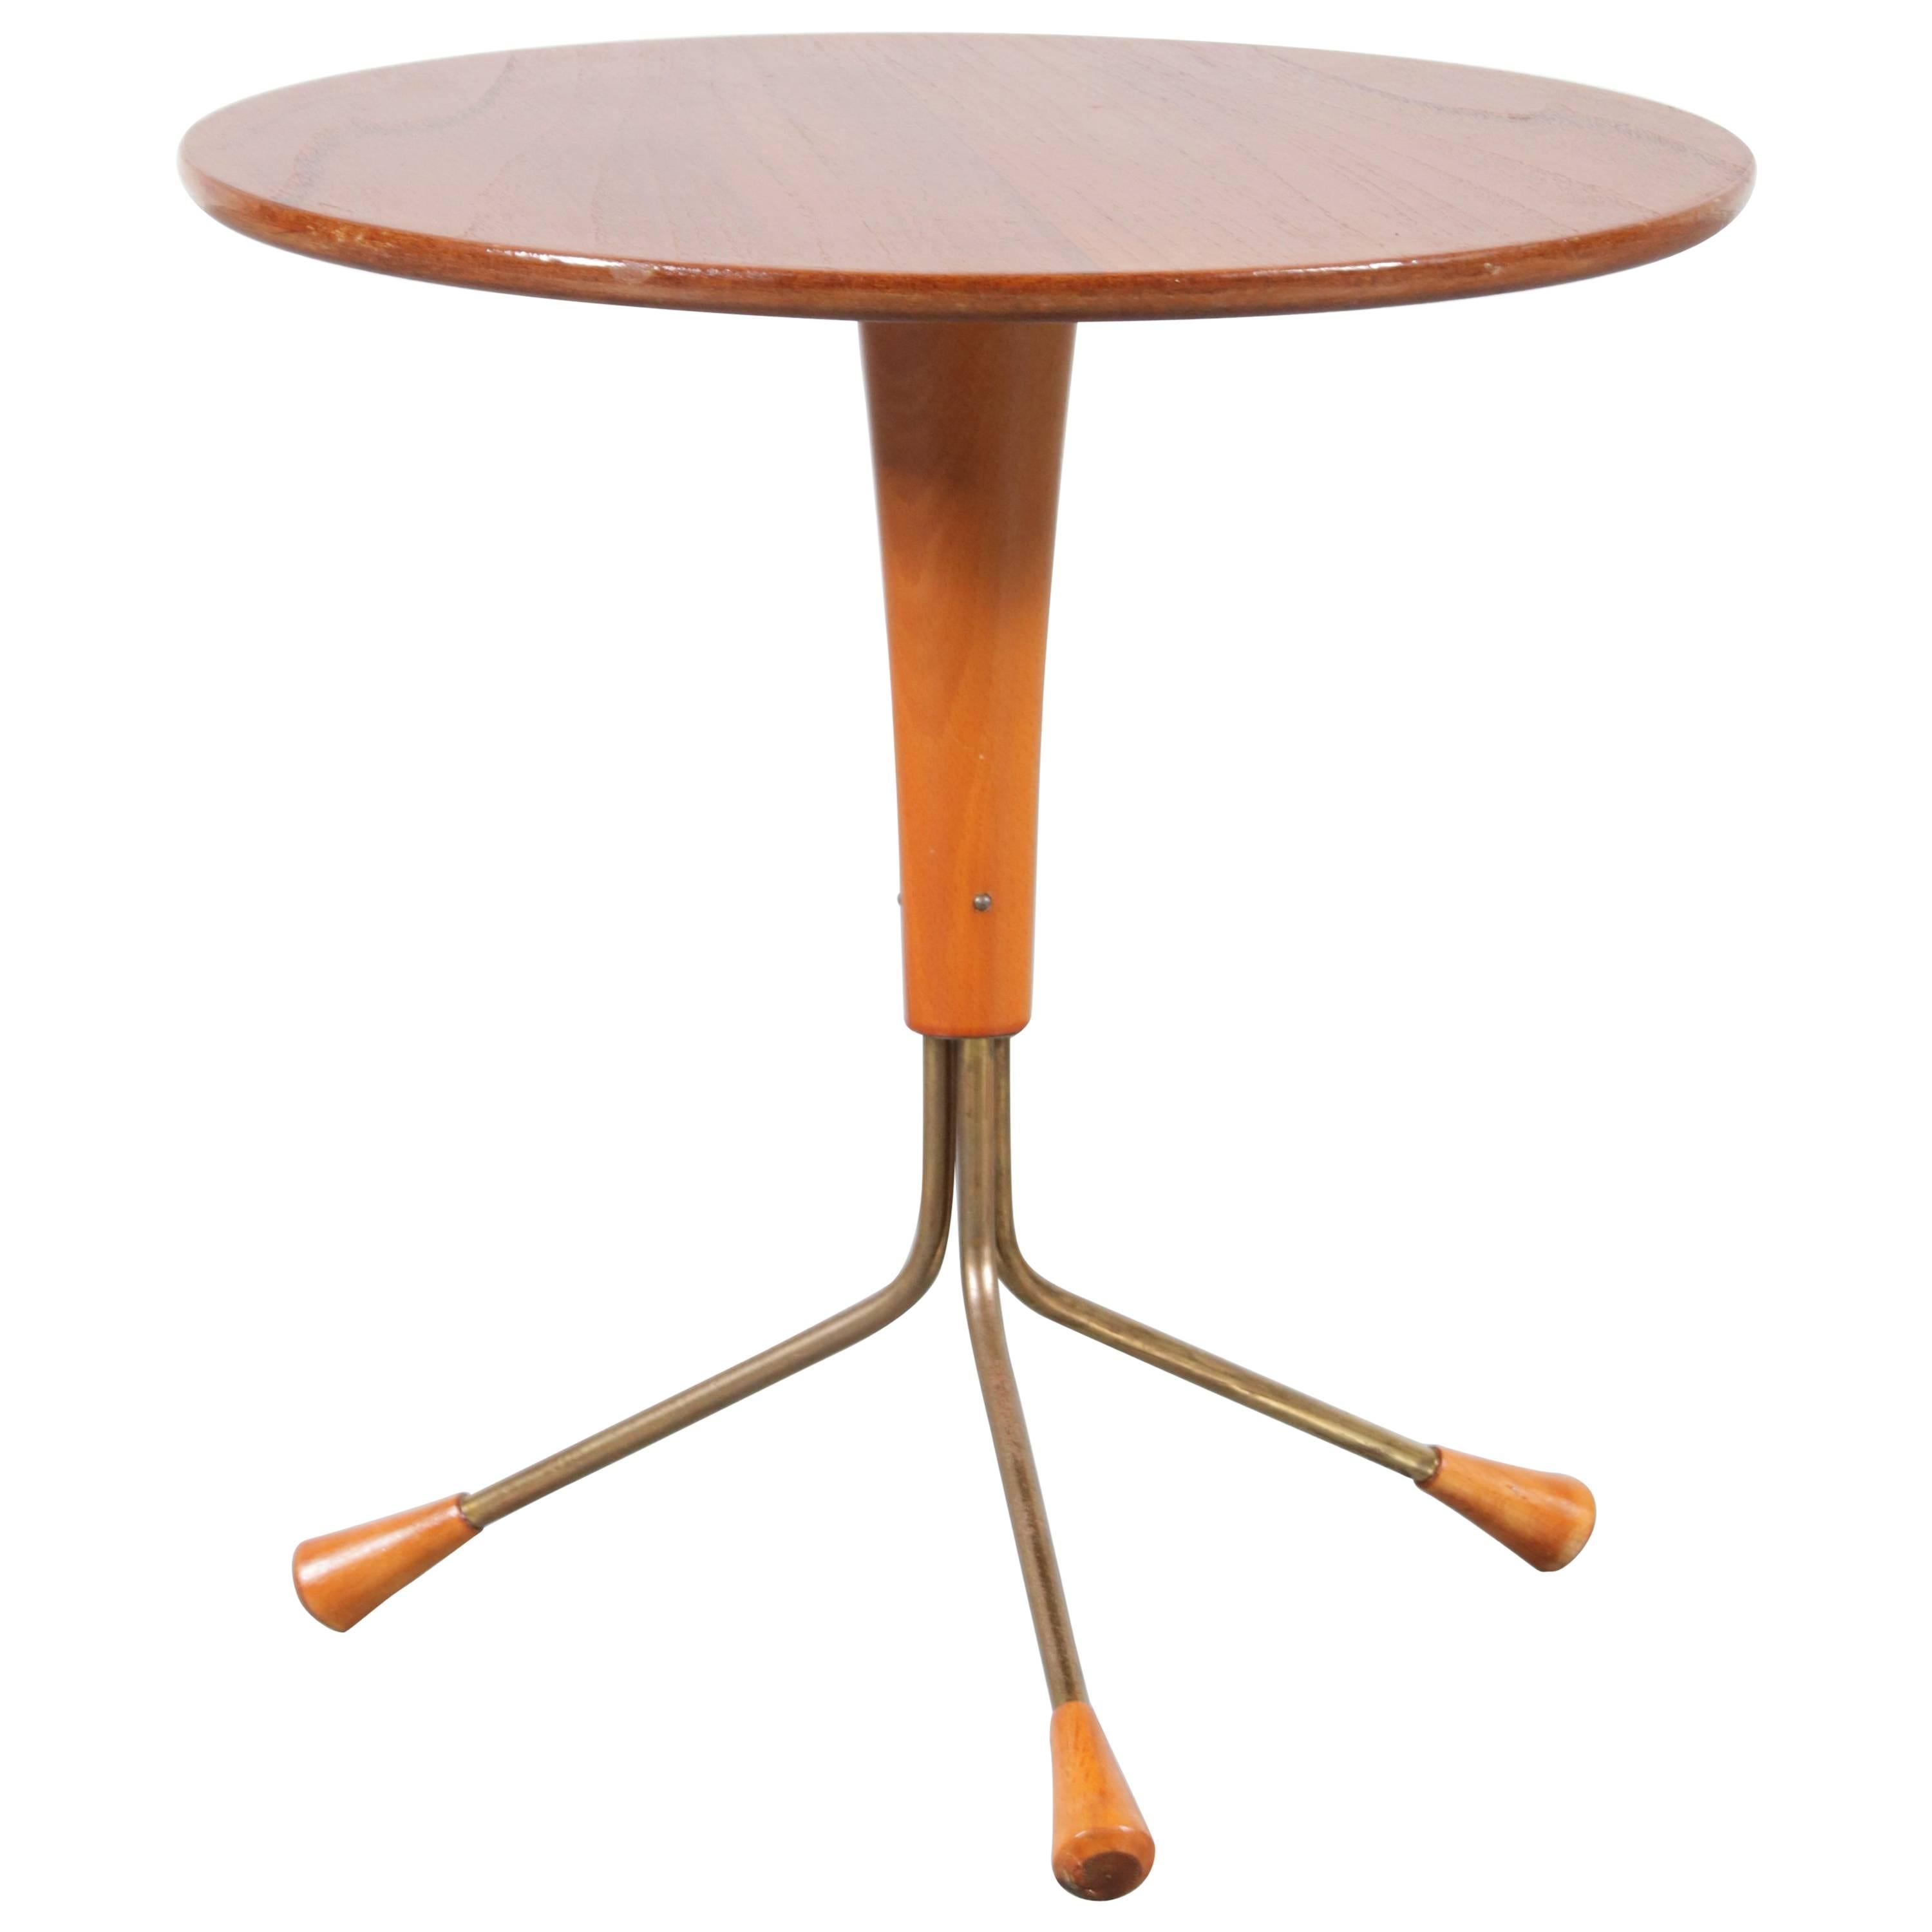 Tripod Side Table by Albert Larsson for Tibro, Sweden 1950